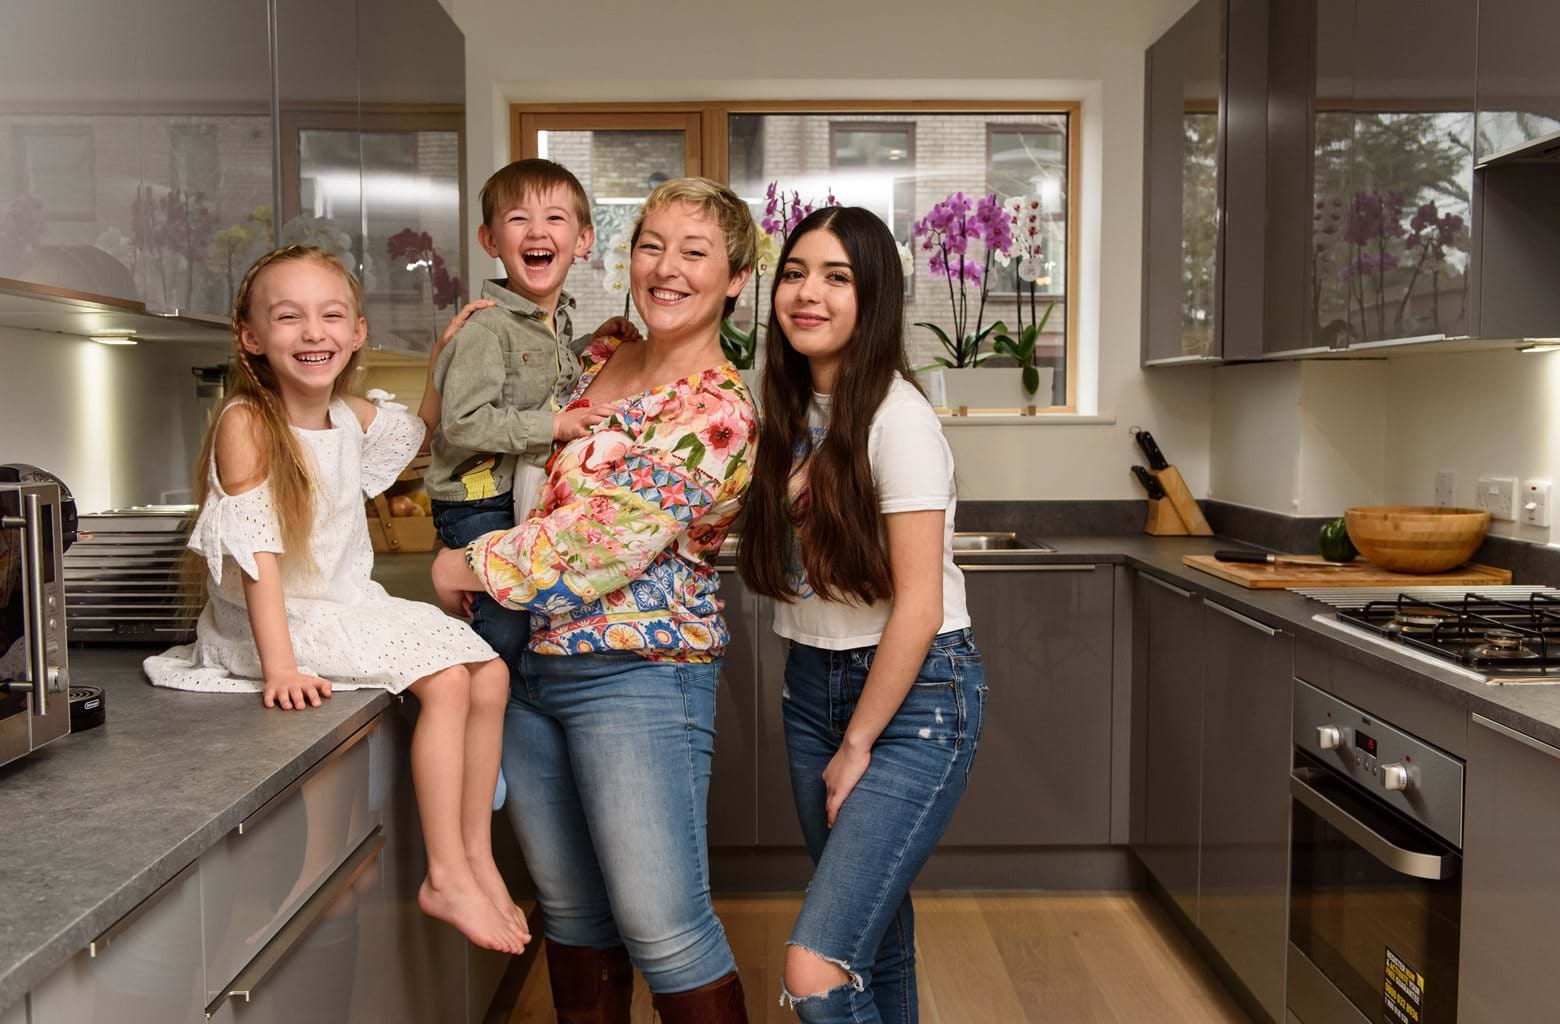 Using Shared Ownership, Beatriz moved from a two-bedroom rented property into a beautiful new four-bedroom home at Peabody’s award-winning development, Stonelea Gardens